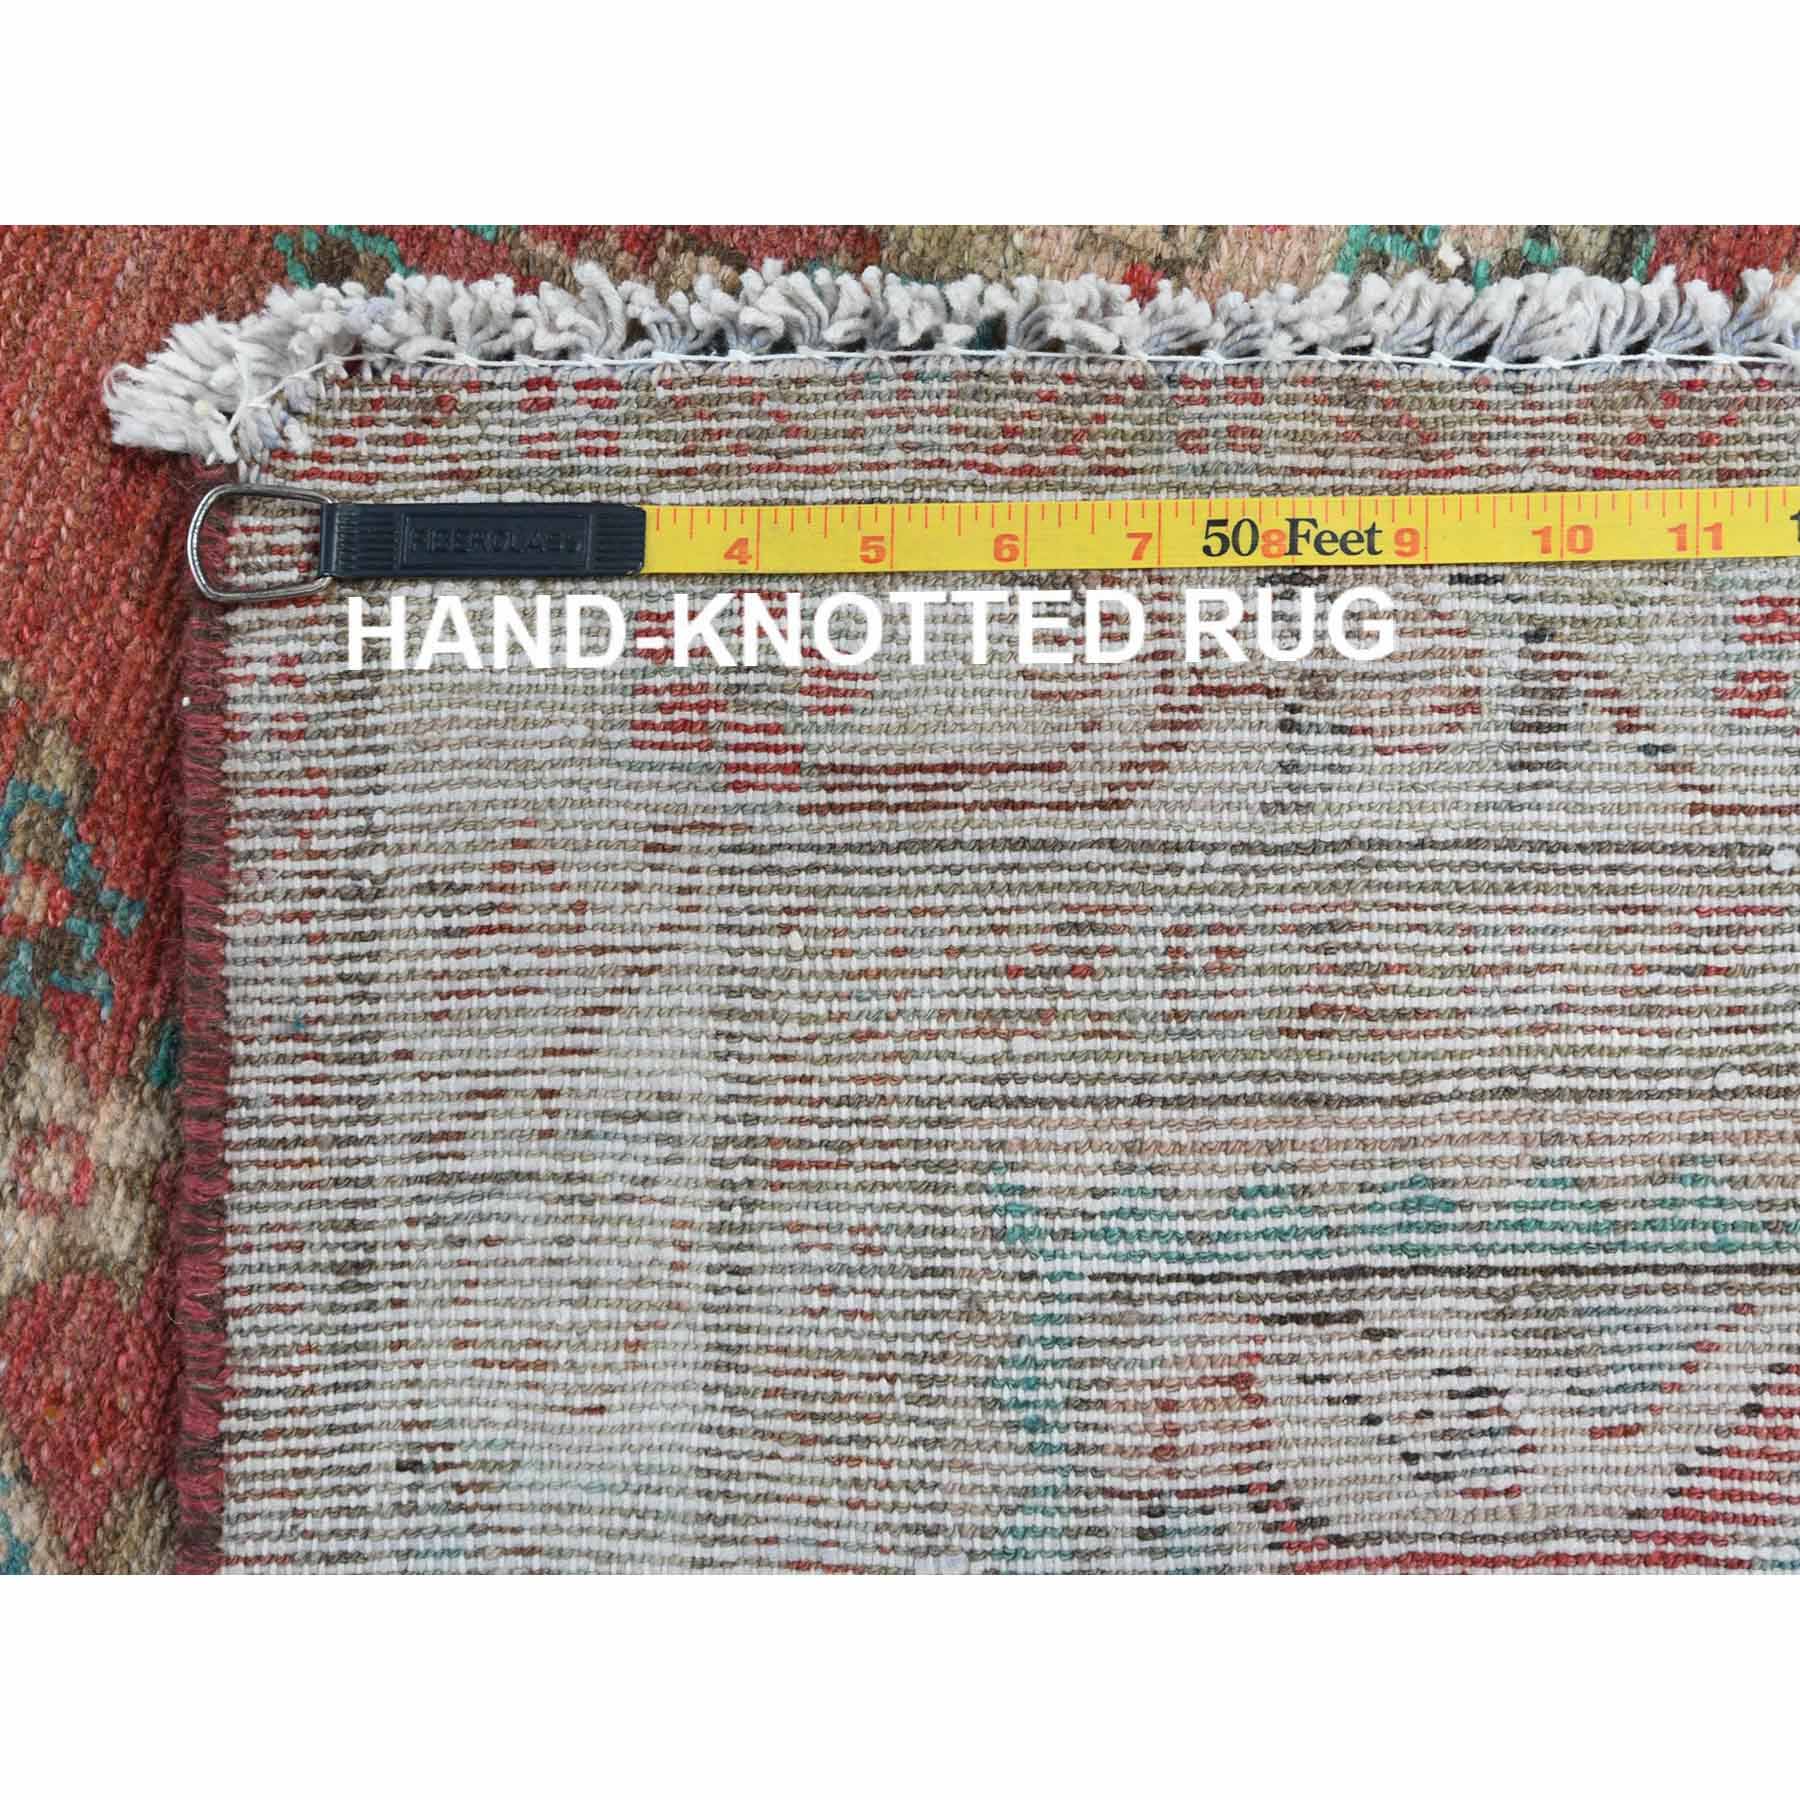 Overdyed-Vintage-Hand-Knotted-Rug-408315